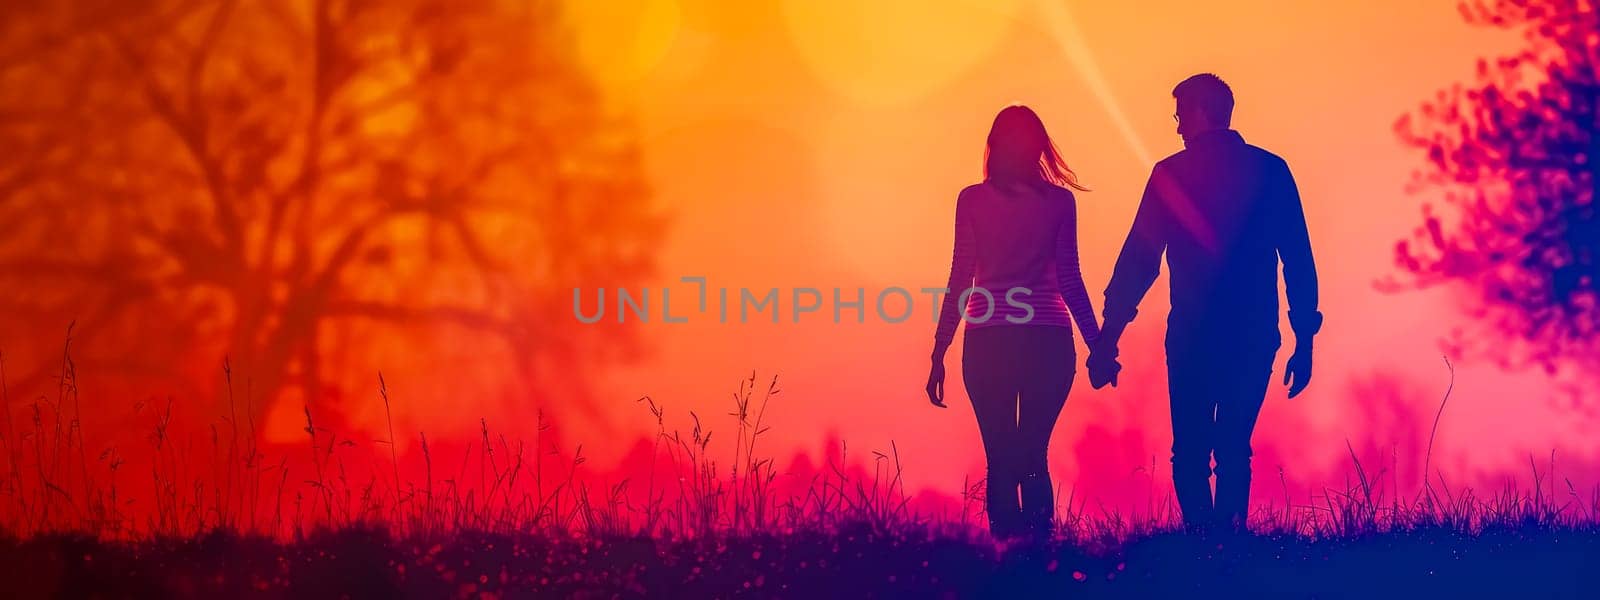 Sunset silhouettes of couple holding hands by Edophoto